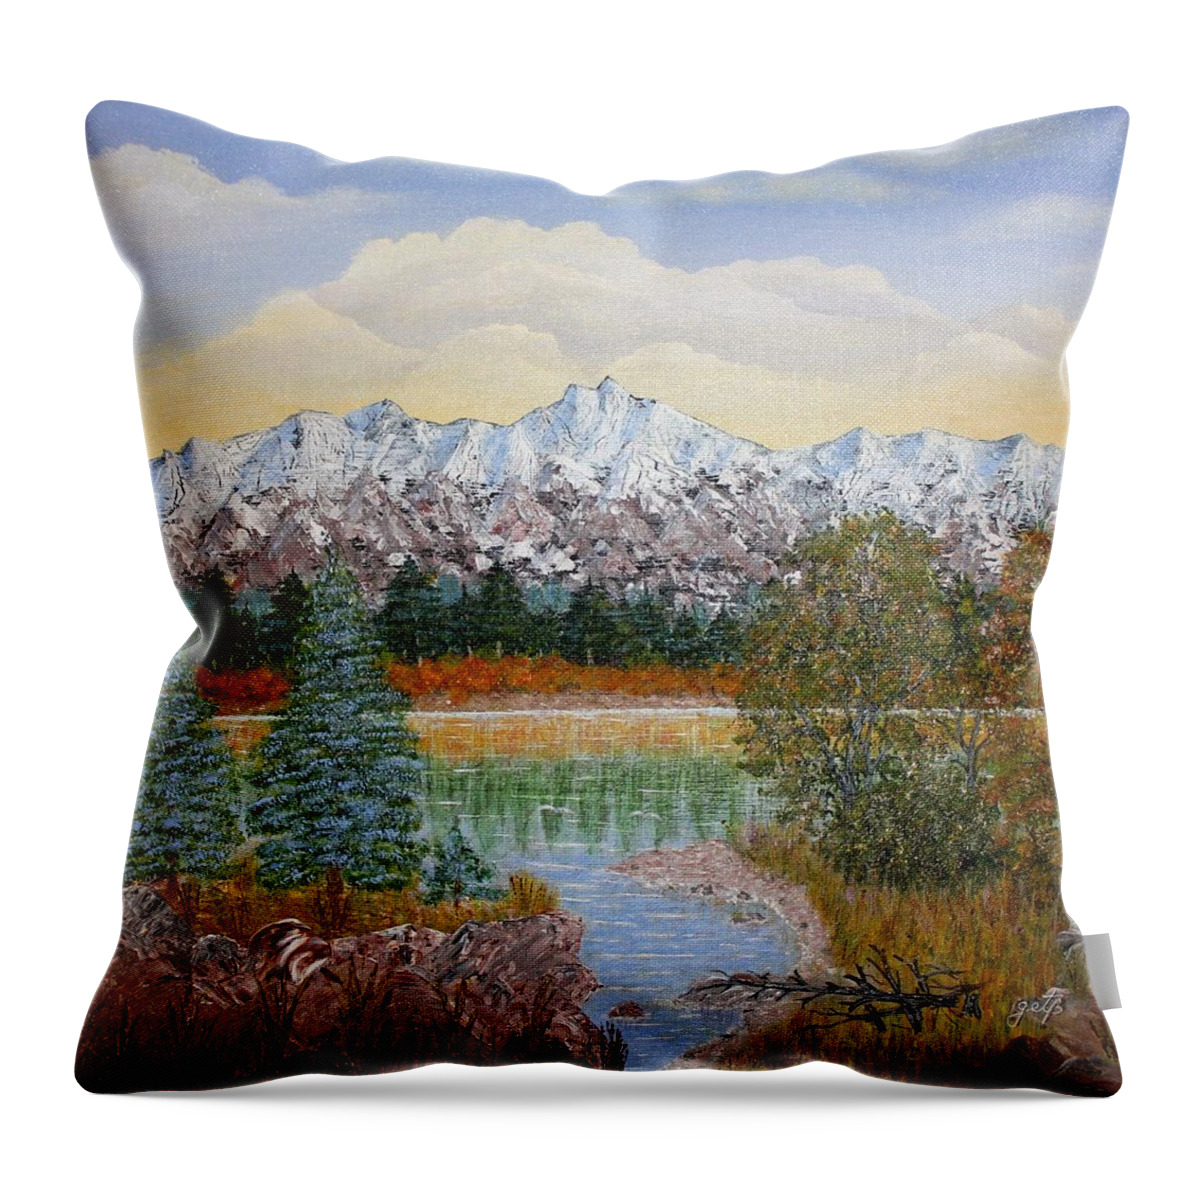 Landscape With Water Mountain Trees Throw Pillow featuring the painting Mountain Fall by Georgeta Blanaru